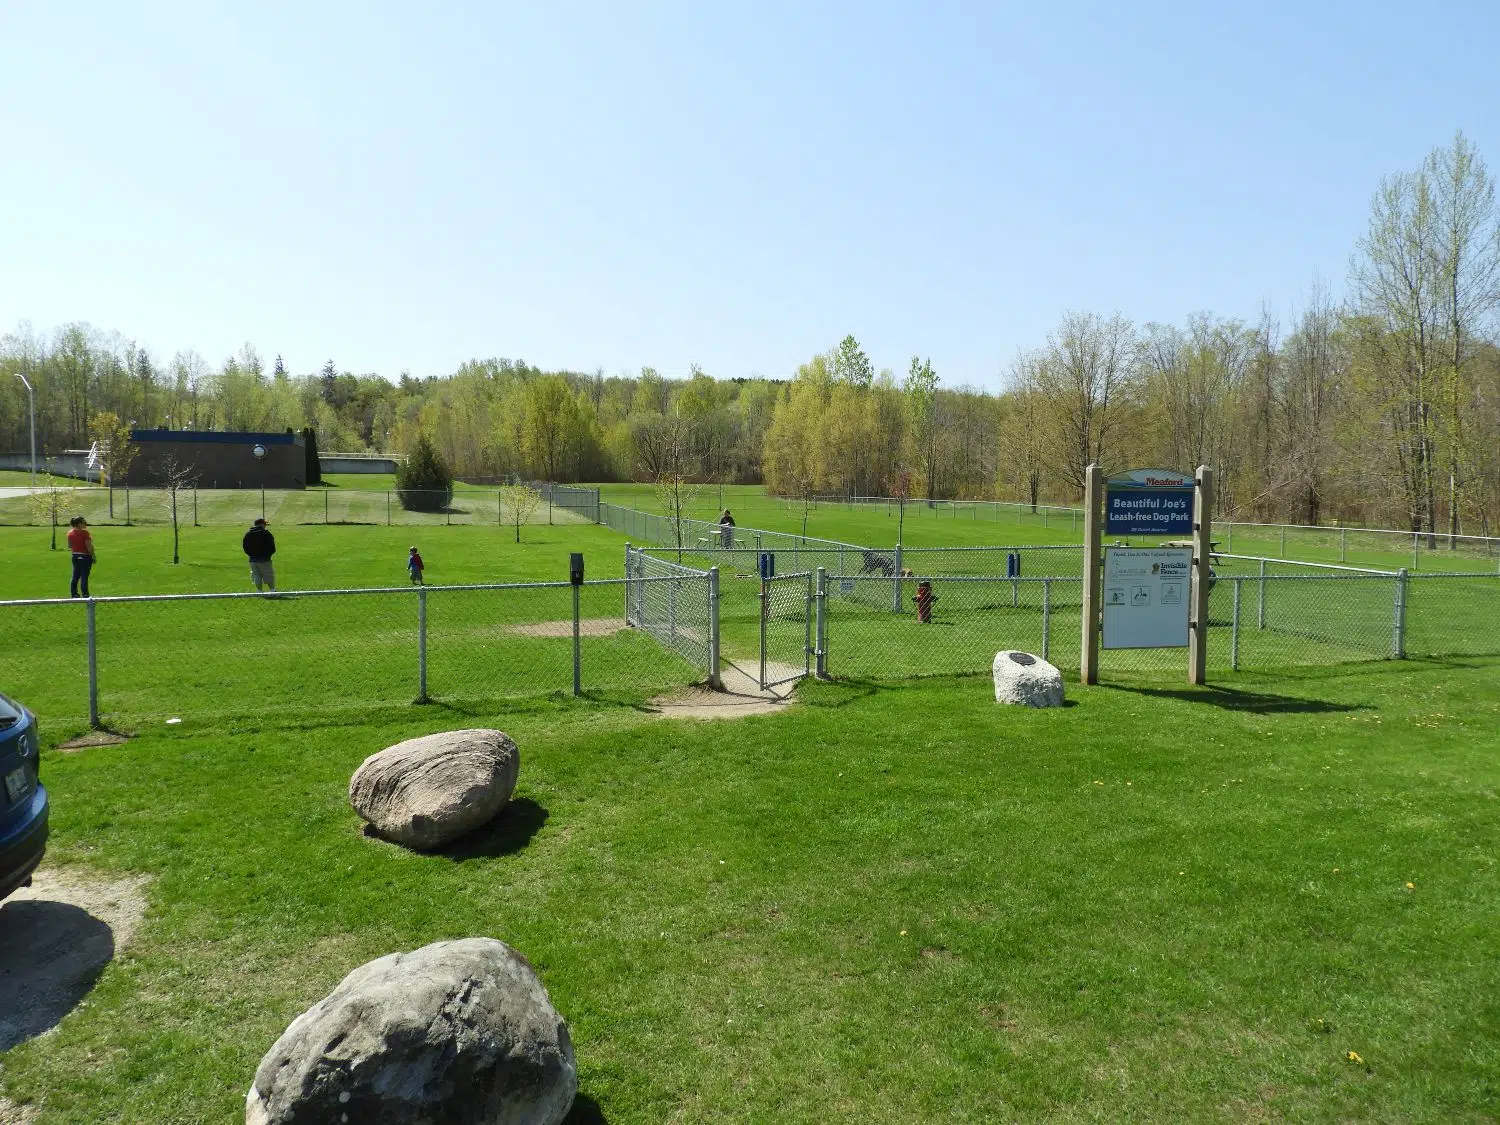 Deliberate Closure For Gorgeous Joe Canine Park Not on time